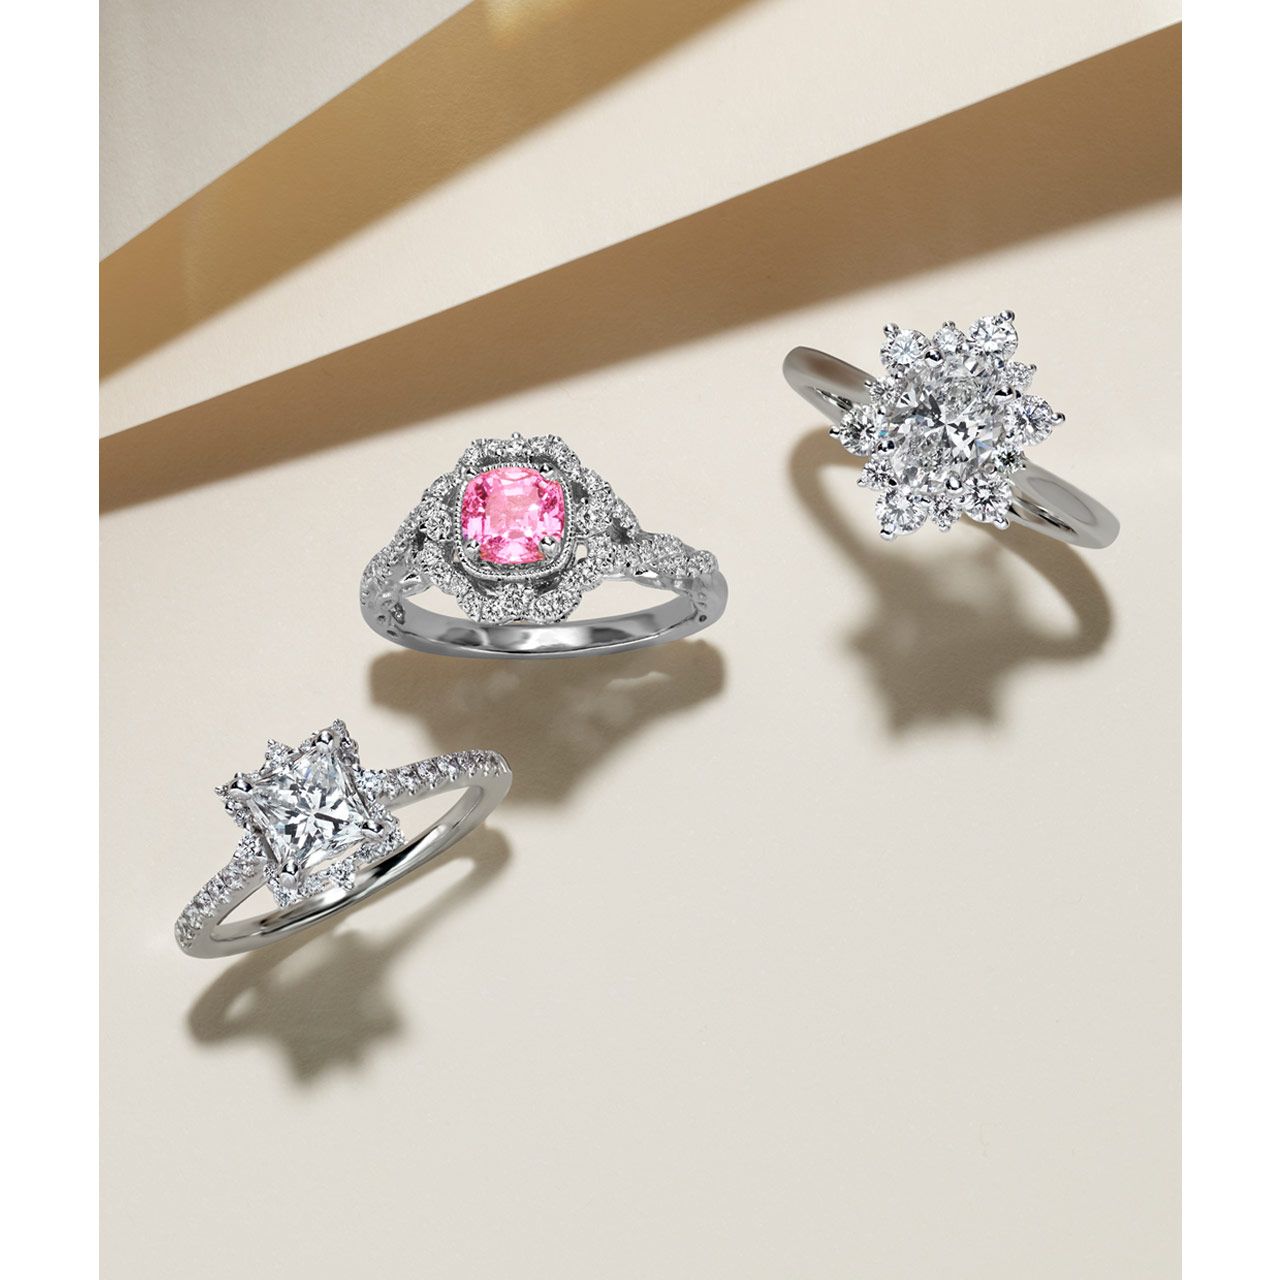 Top View of Three Engagement Rings